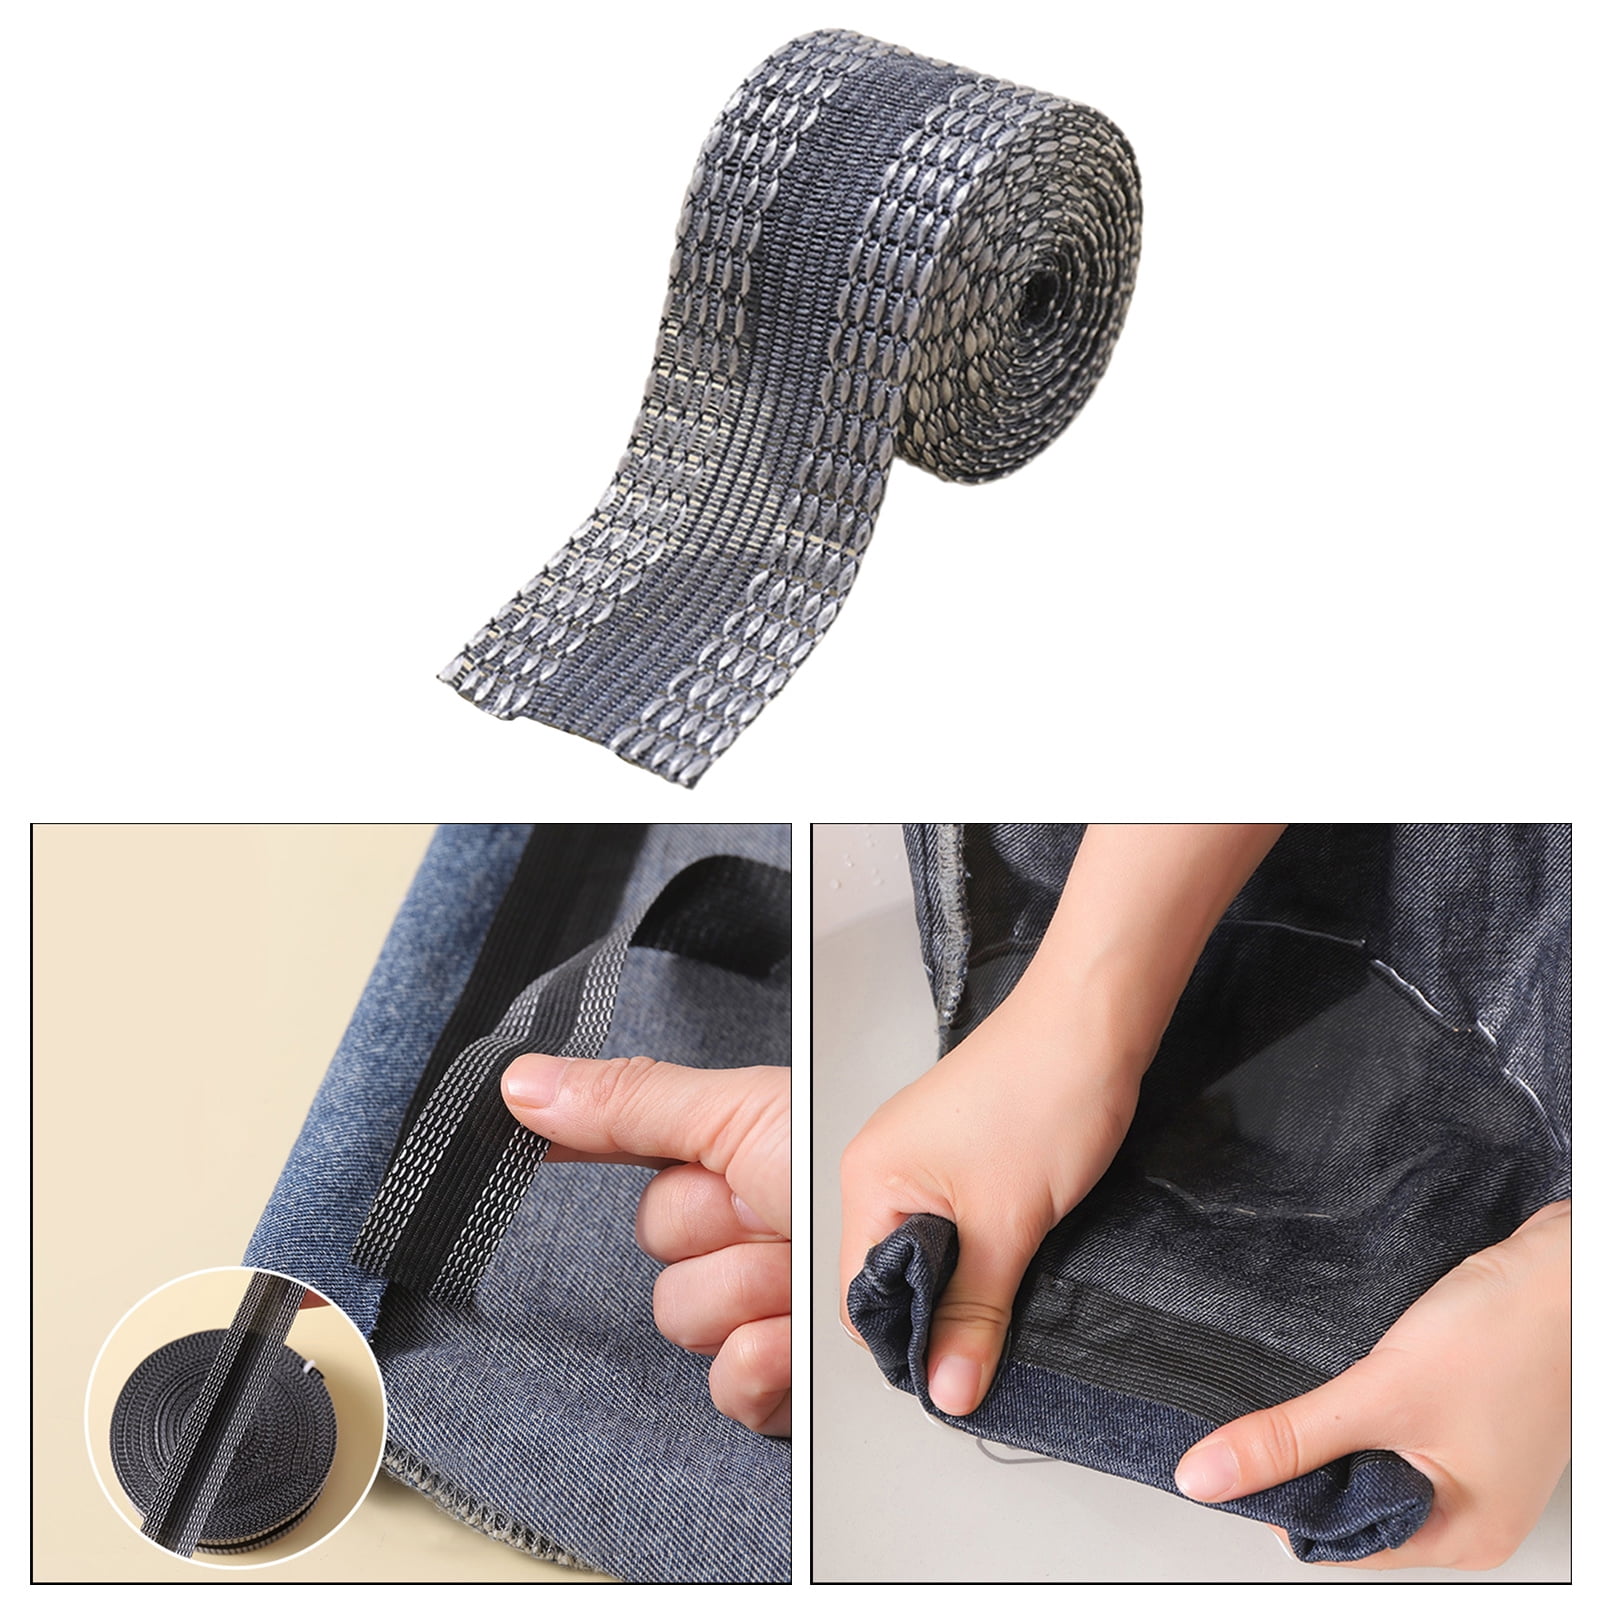 TRGGBH 3.3 Yards Hem Tape for Pants, 24Mm Adhesive Hemming Tape, Iron-On  Fabric Hem Tapes for Hemming, Washable, for Suit Trousers Jeans Garment